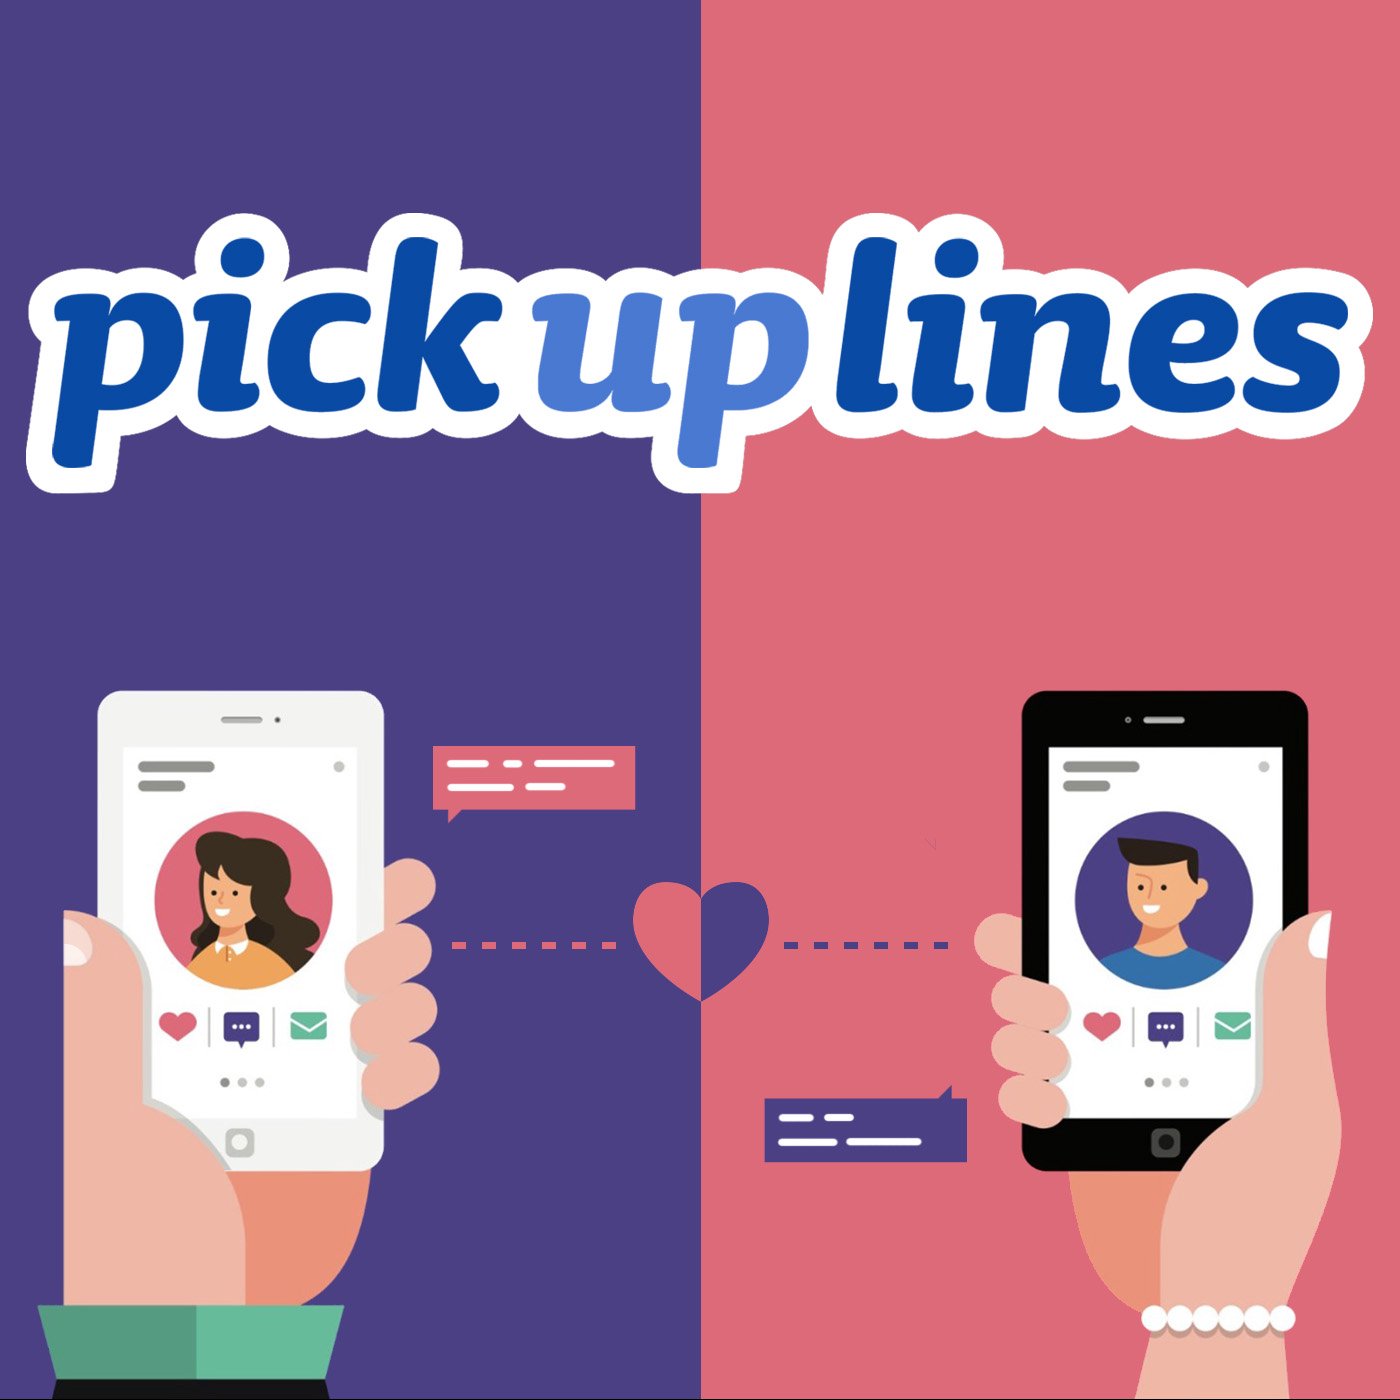 PICK-UP LINES: The Art of Lasting Love